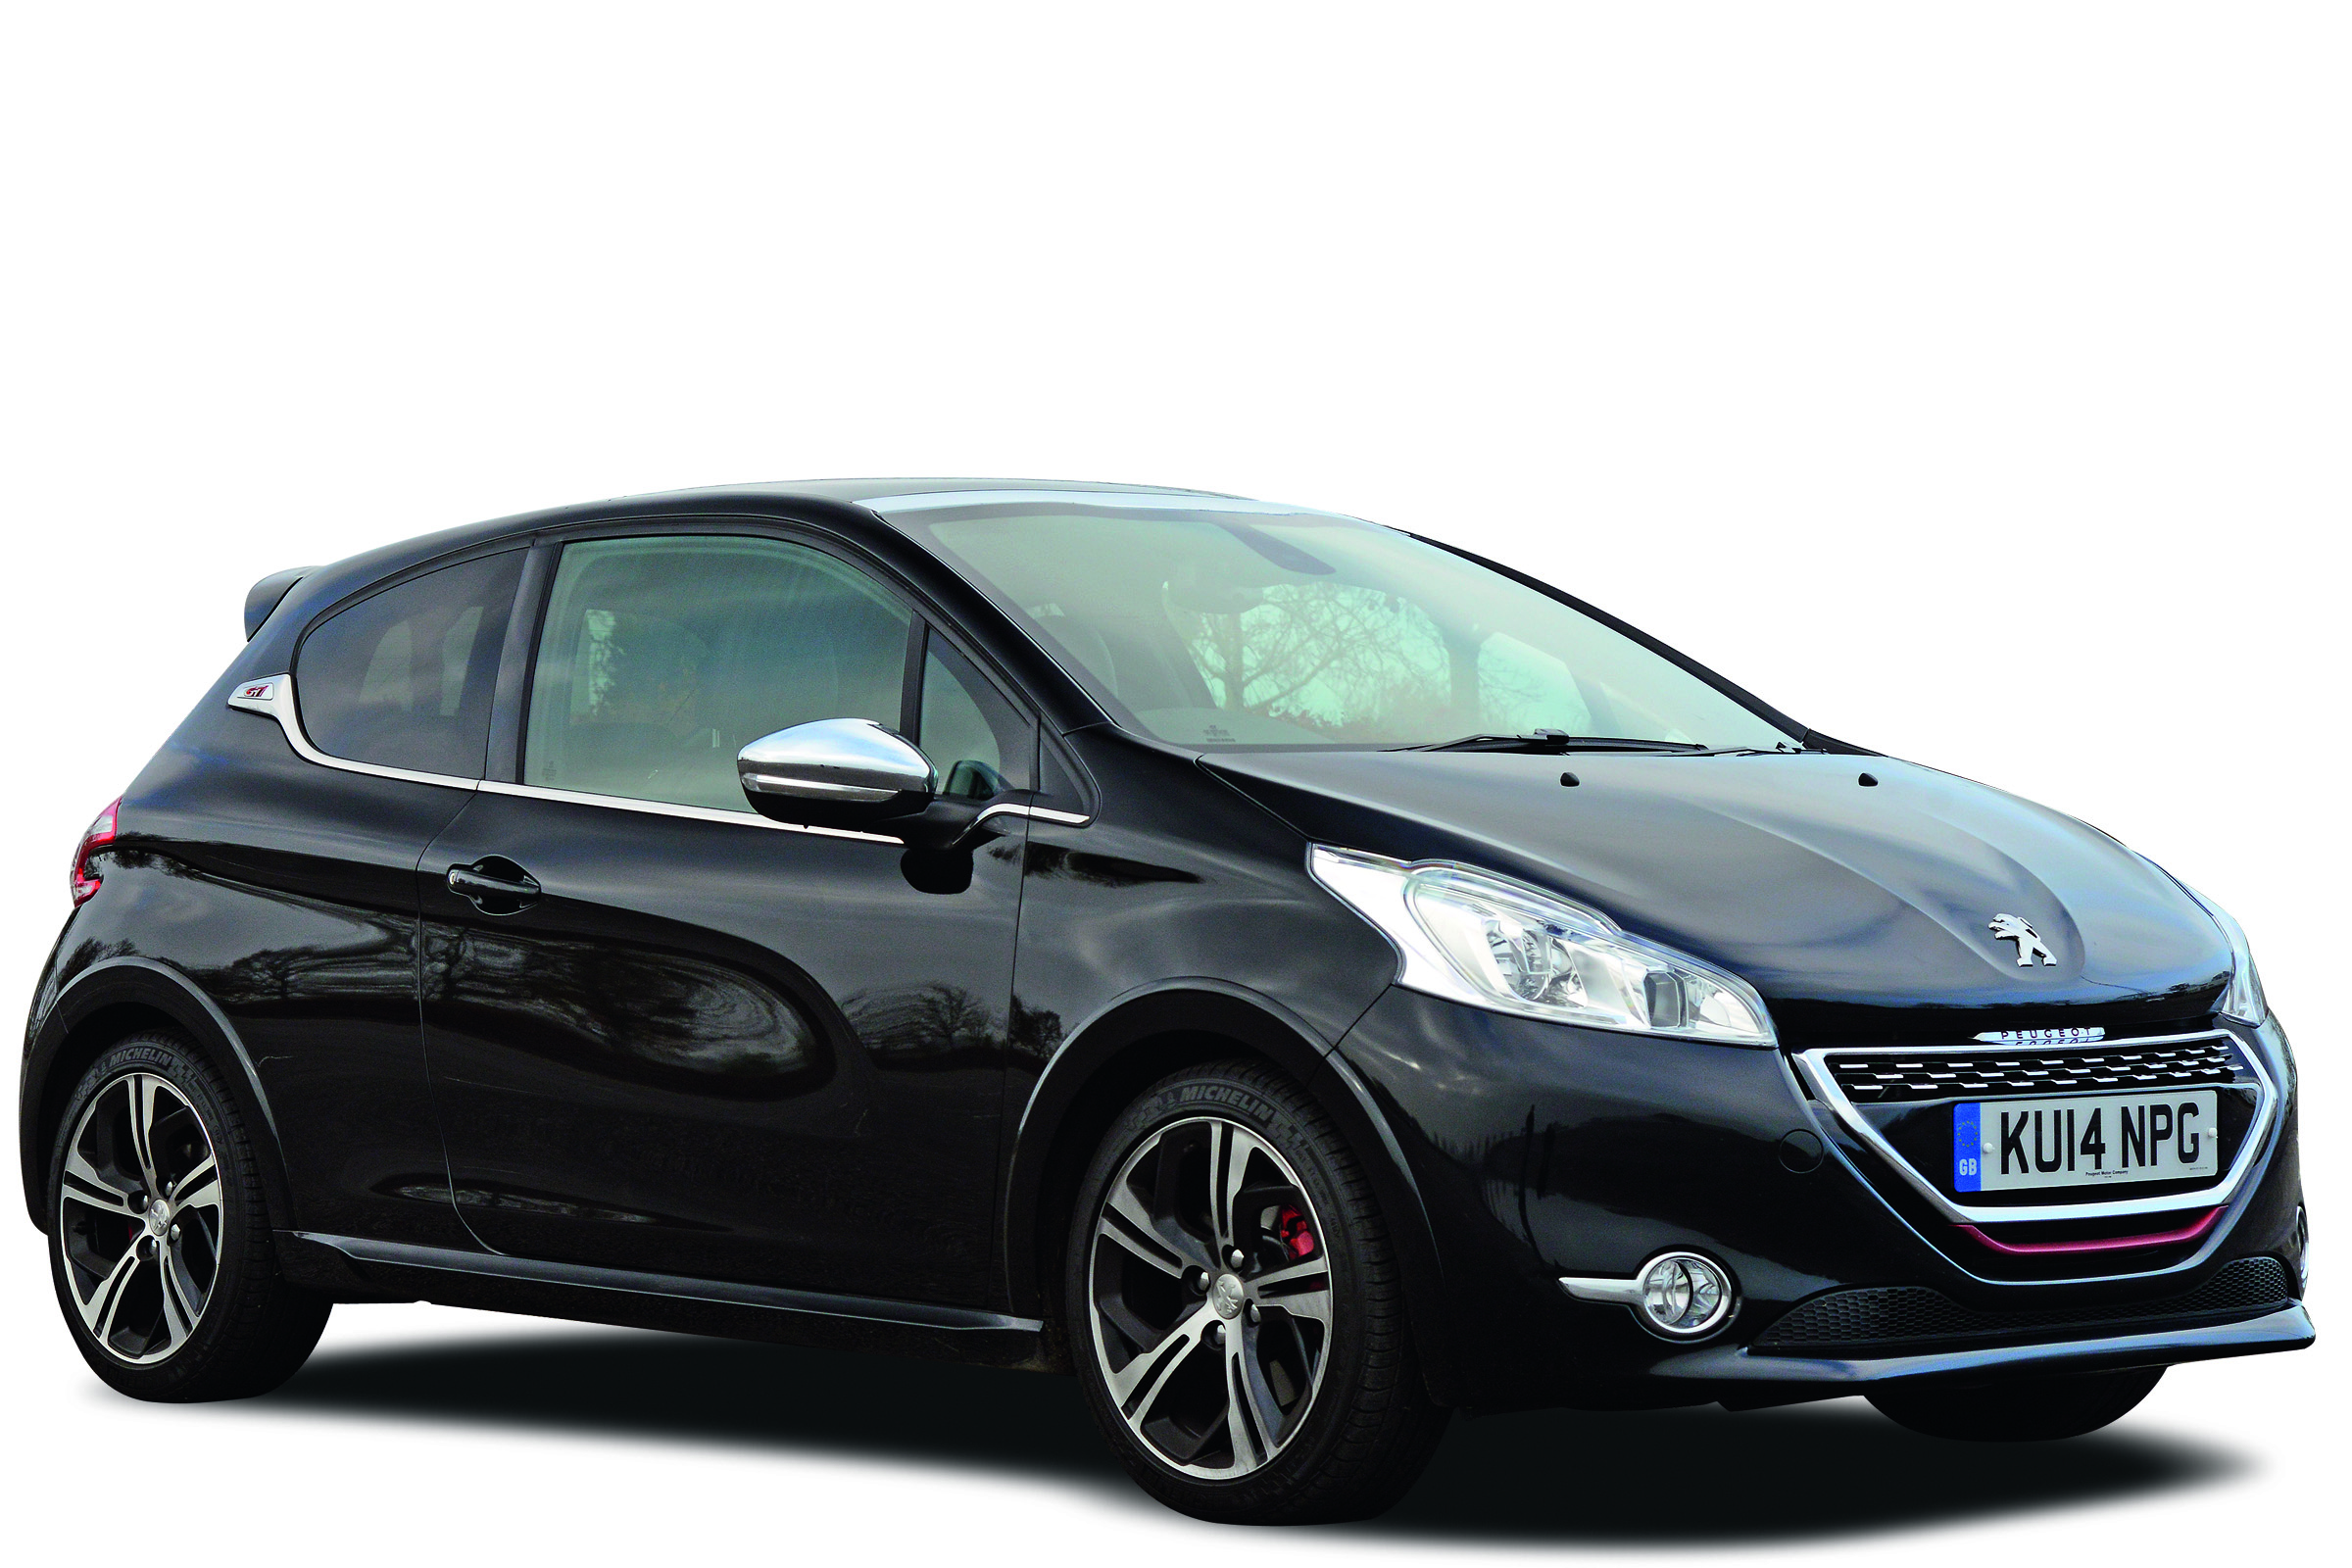 Peugeot 208 GTi hatchback Owner Reviews: MPG, Problems & Reliability ...